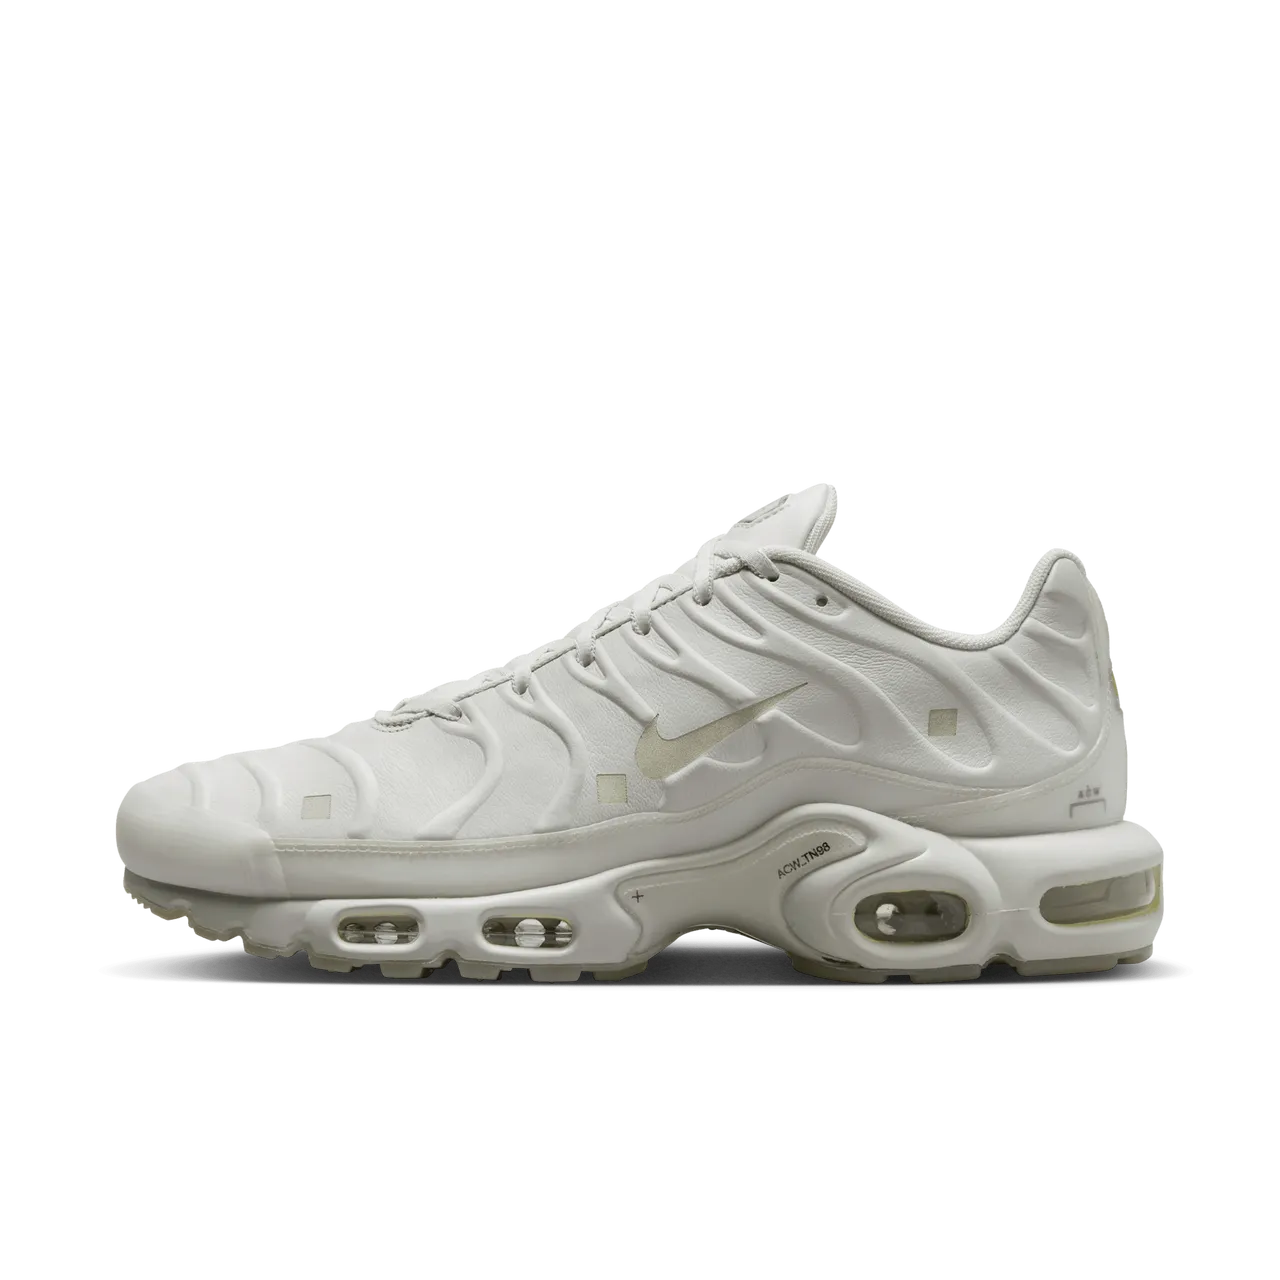 Nike Air Max Plus x A-COLD-WALL* Men's Shoes - Grey